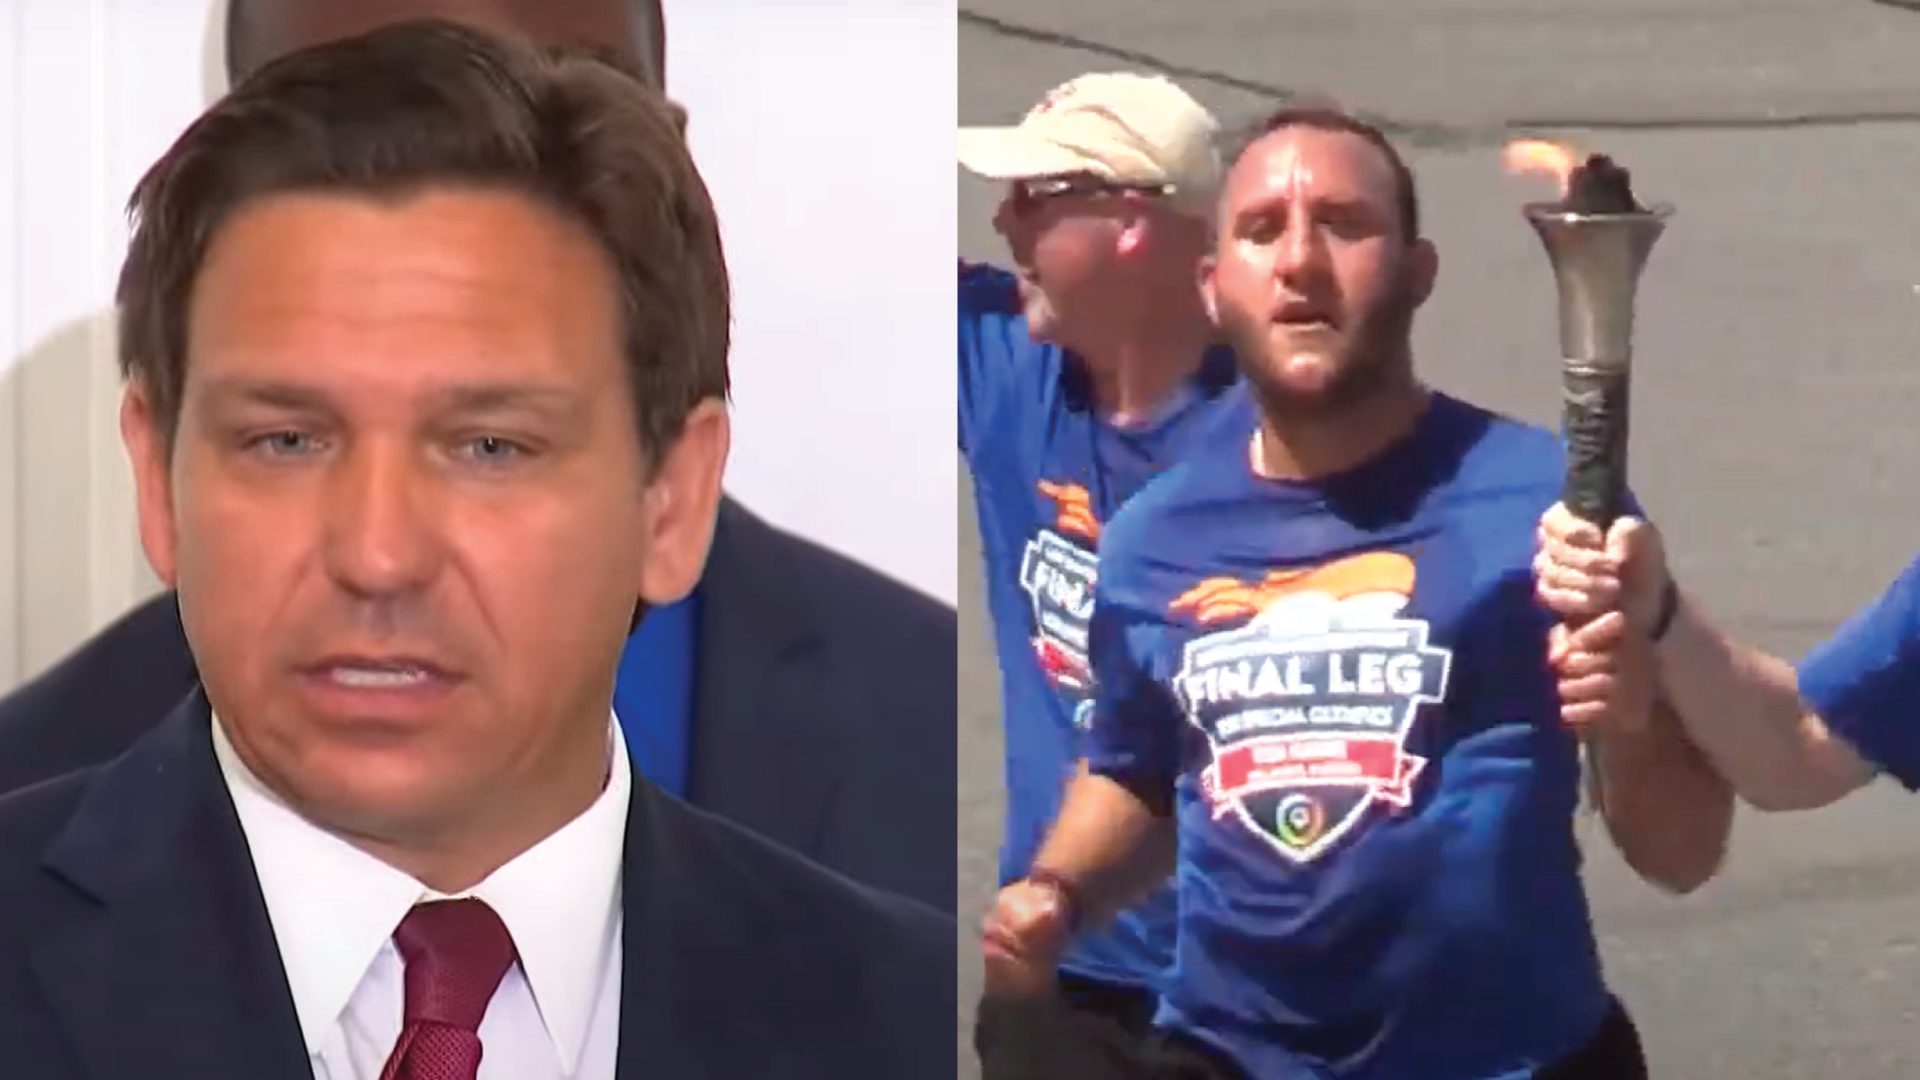 Governor Ron DeSantis successfully forced the Special Olympics to drop their vaccine mandate.